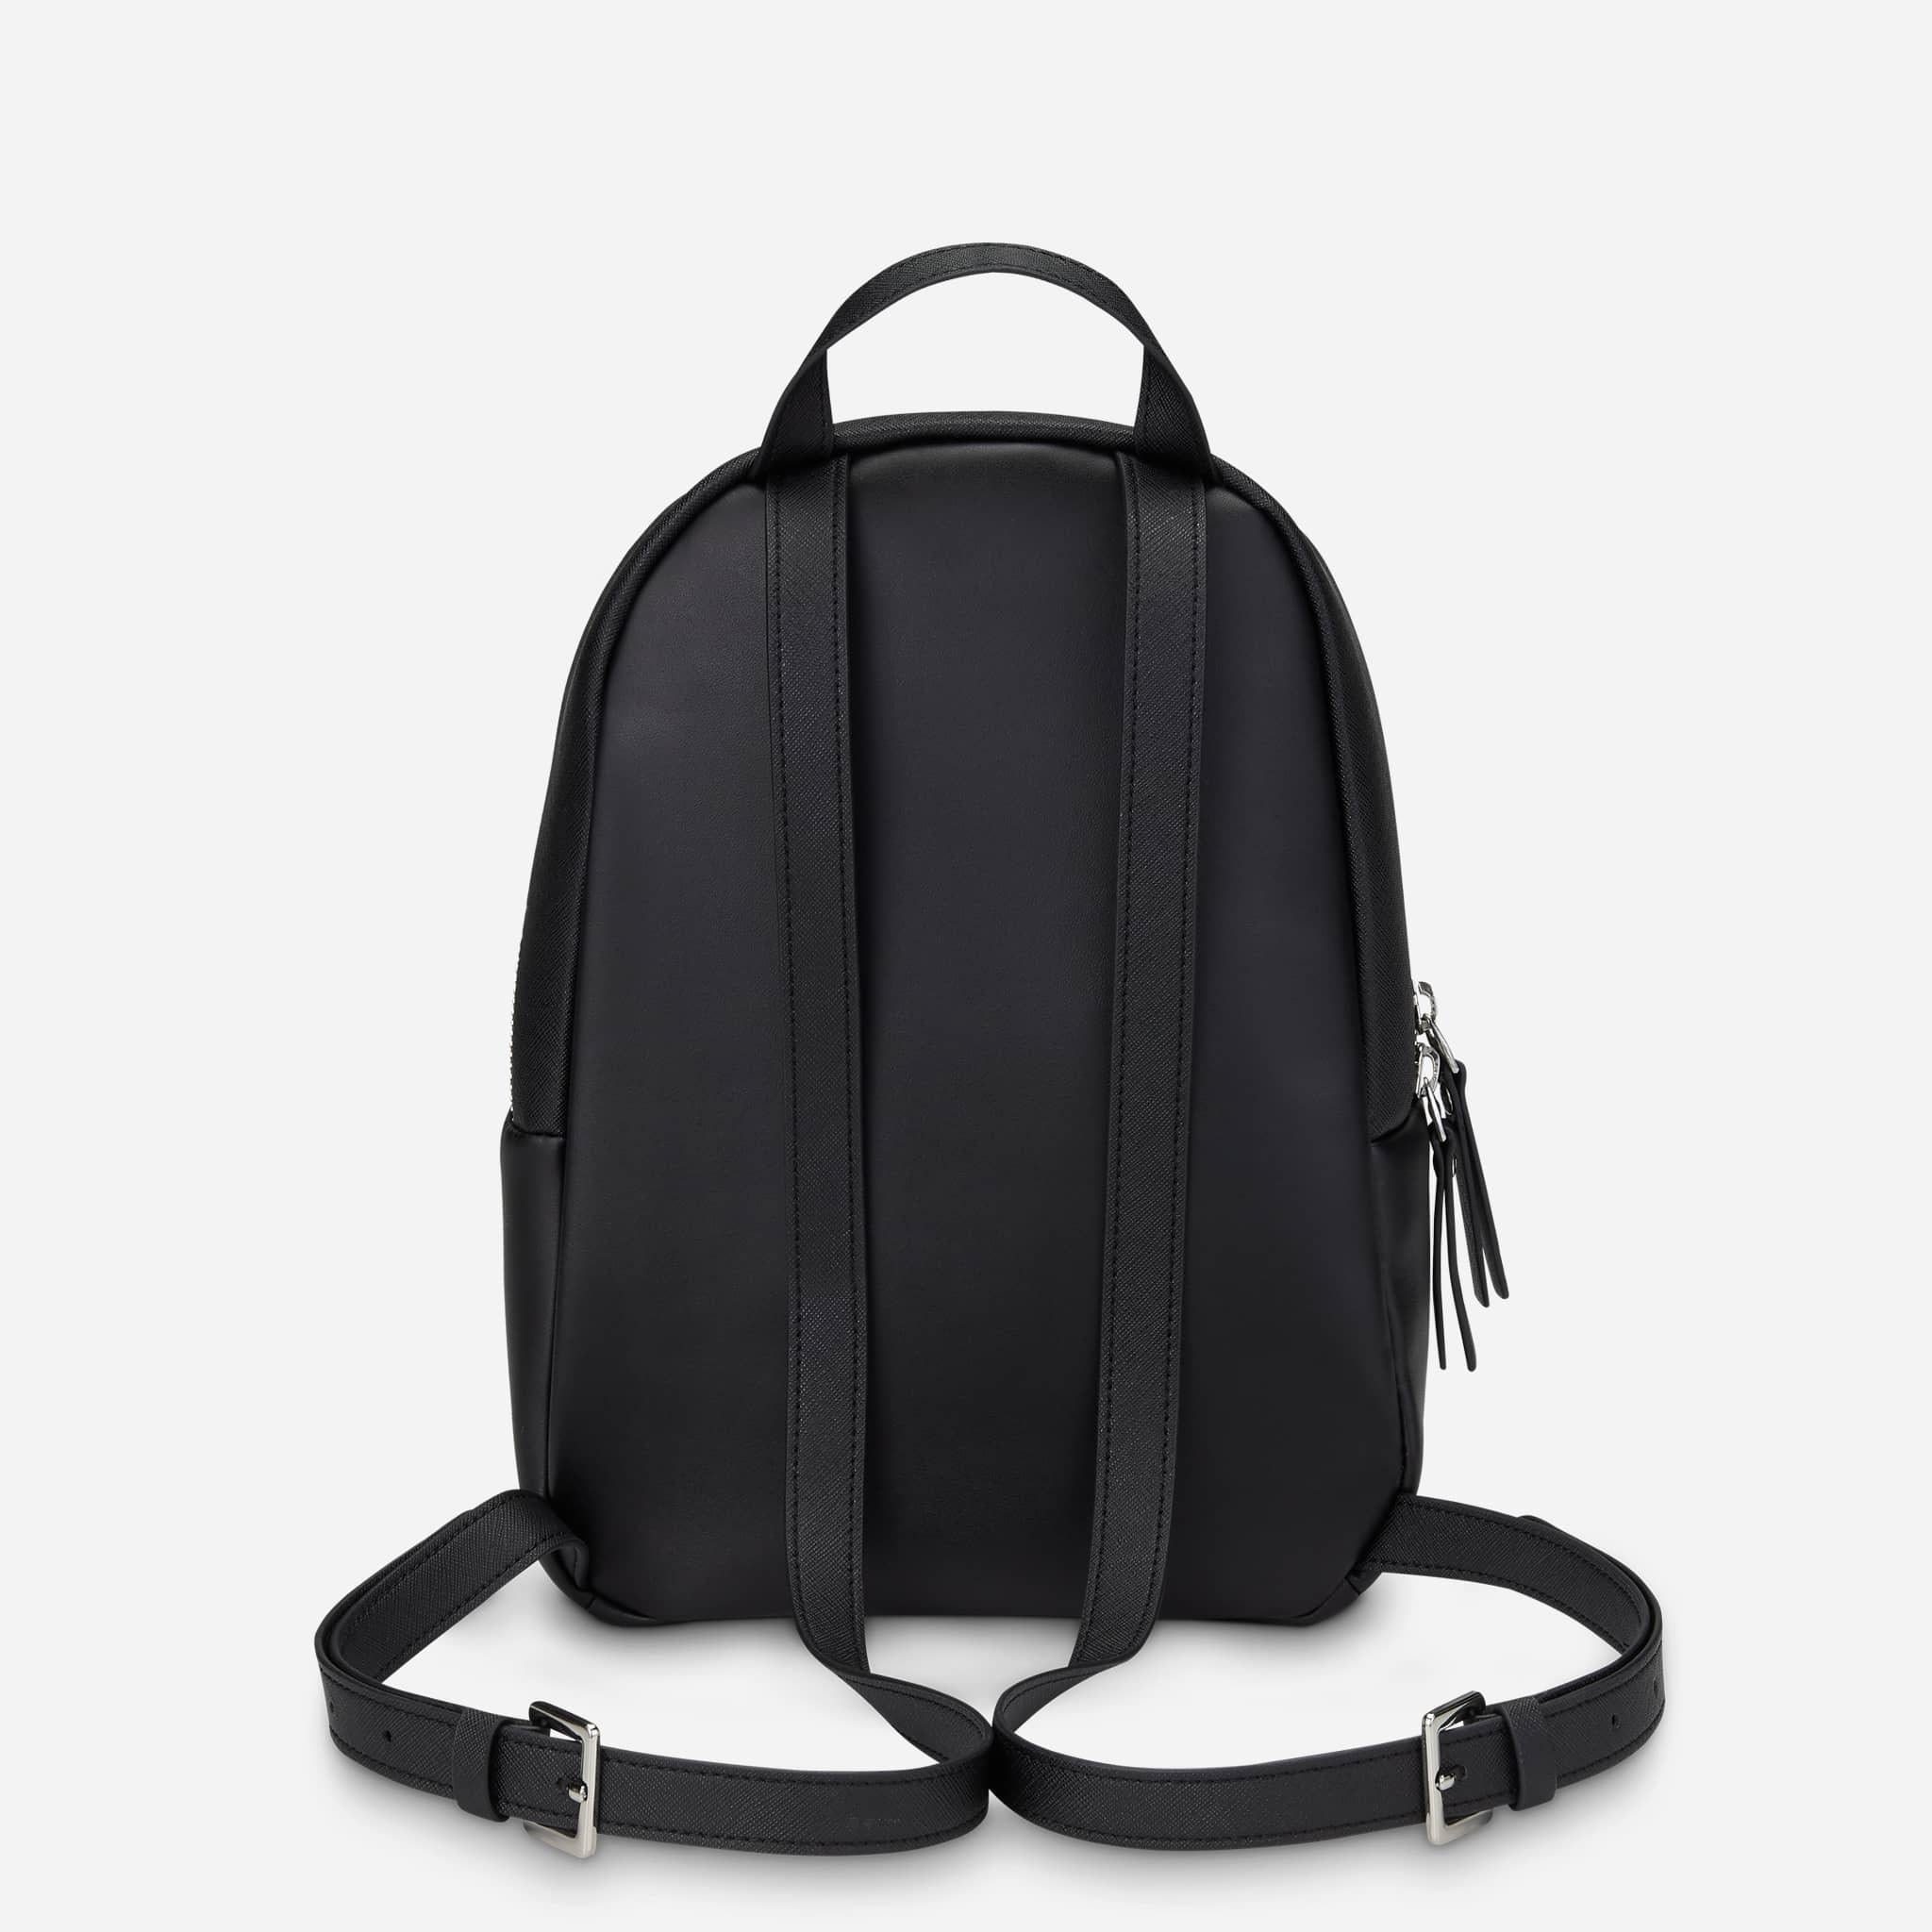 Best women's backpacks: 23 functional and stylish options